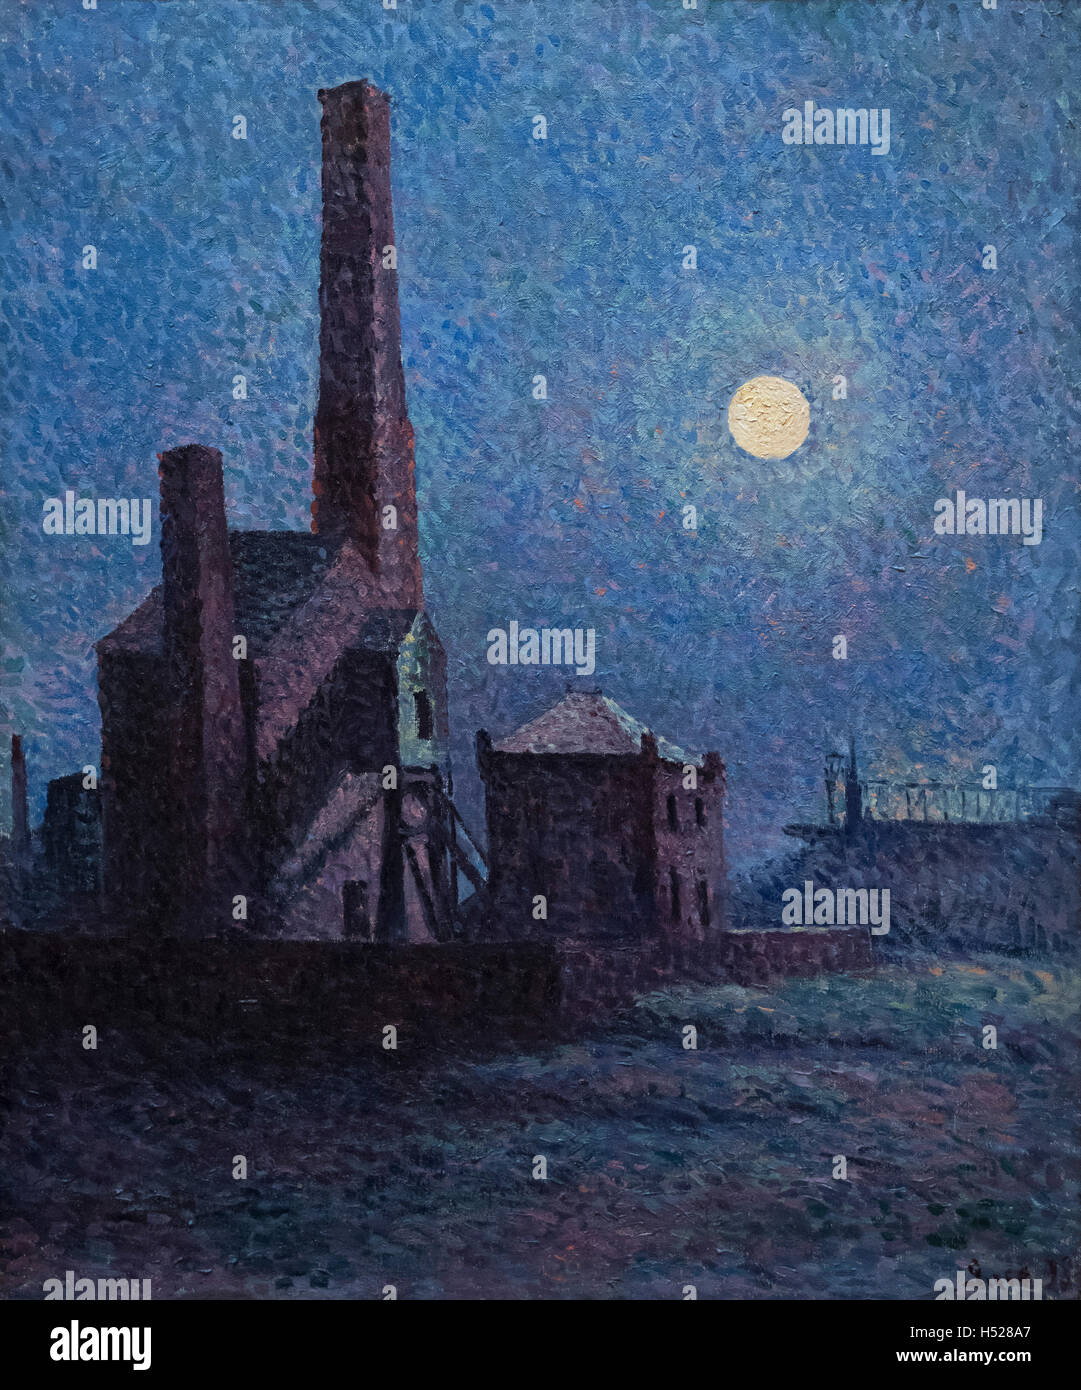 Maximilien Luce (1858-1941), Factory in the Moonlight, 1898. Stock Photo